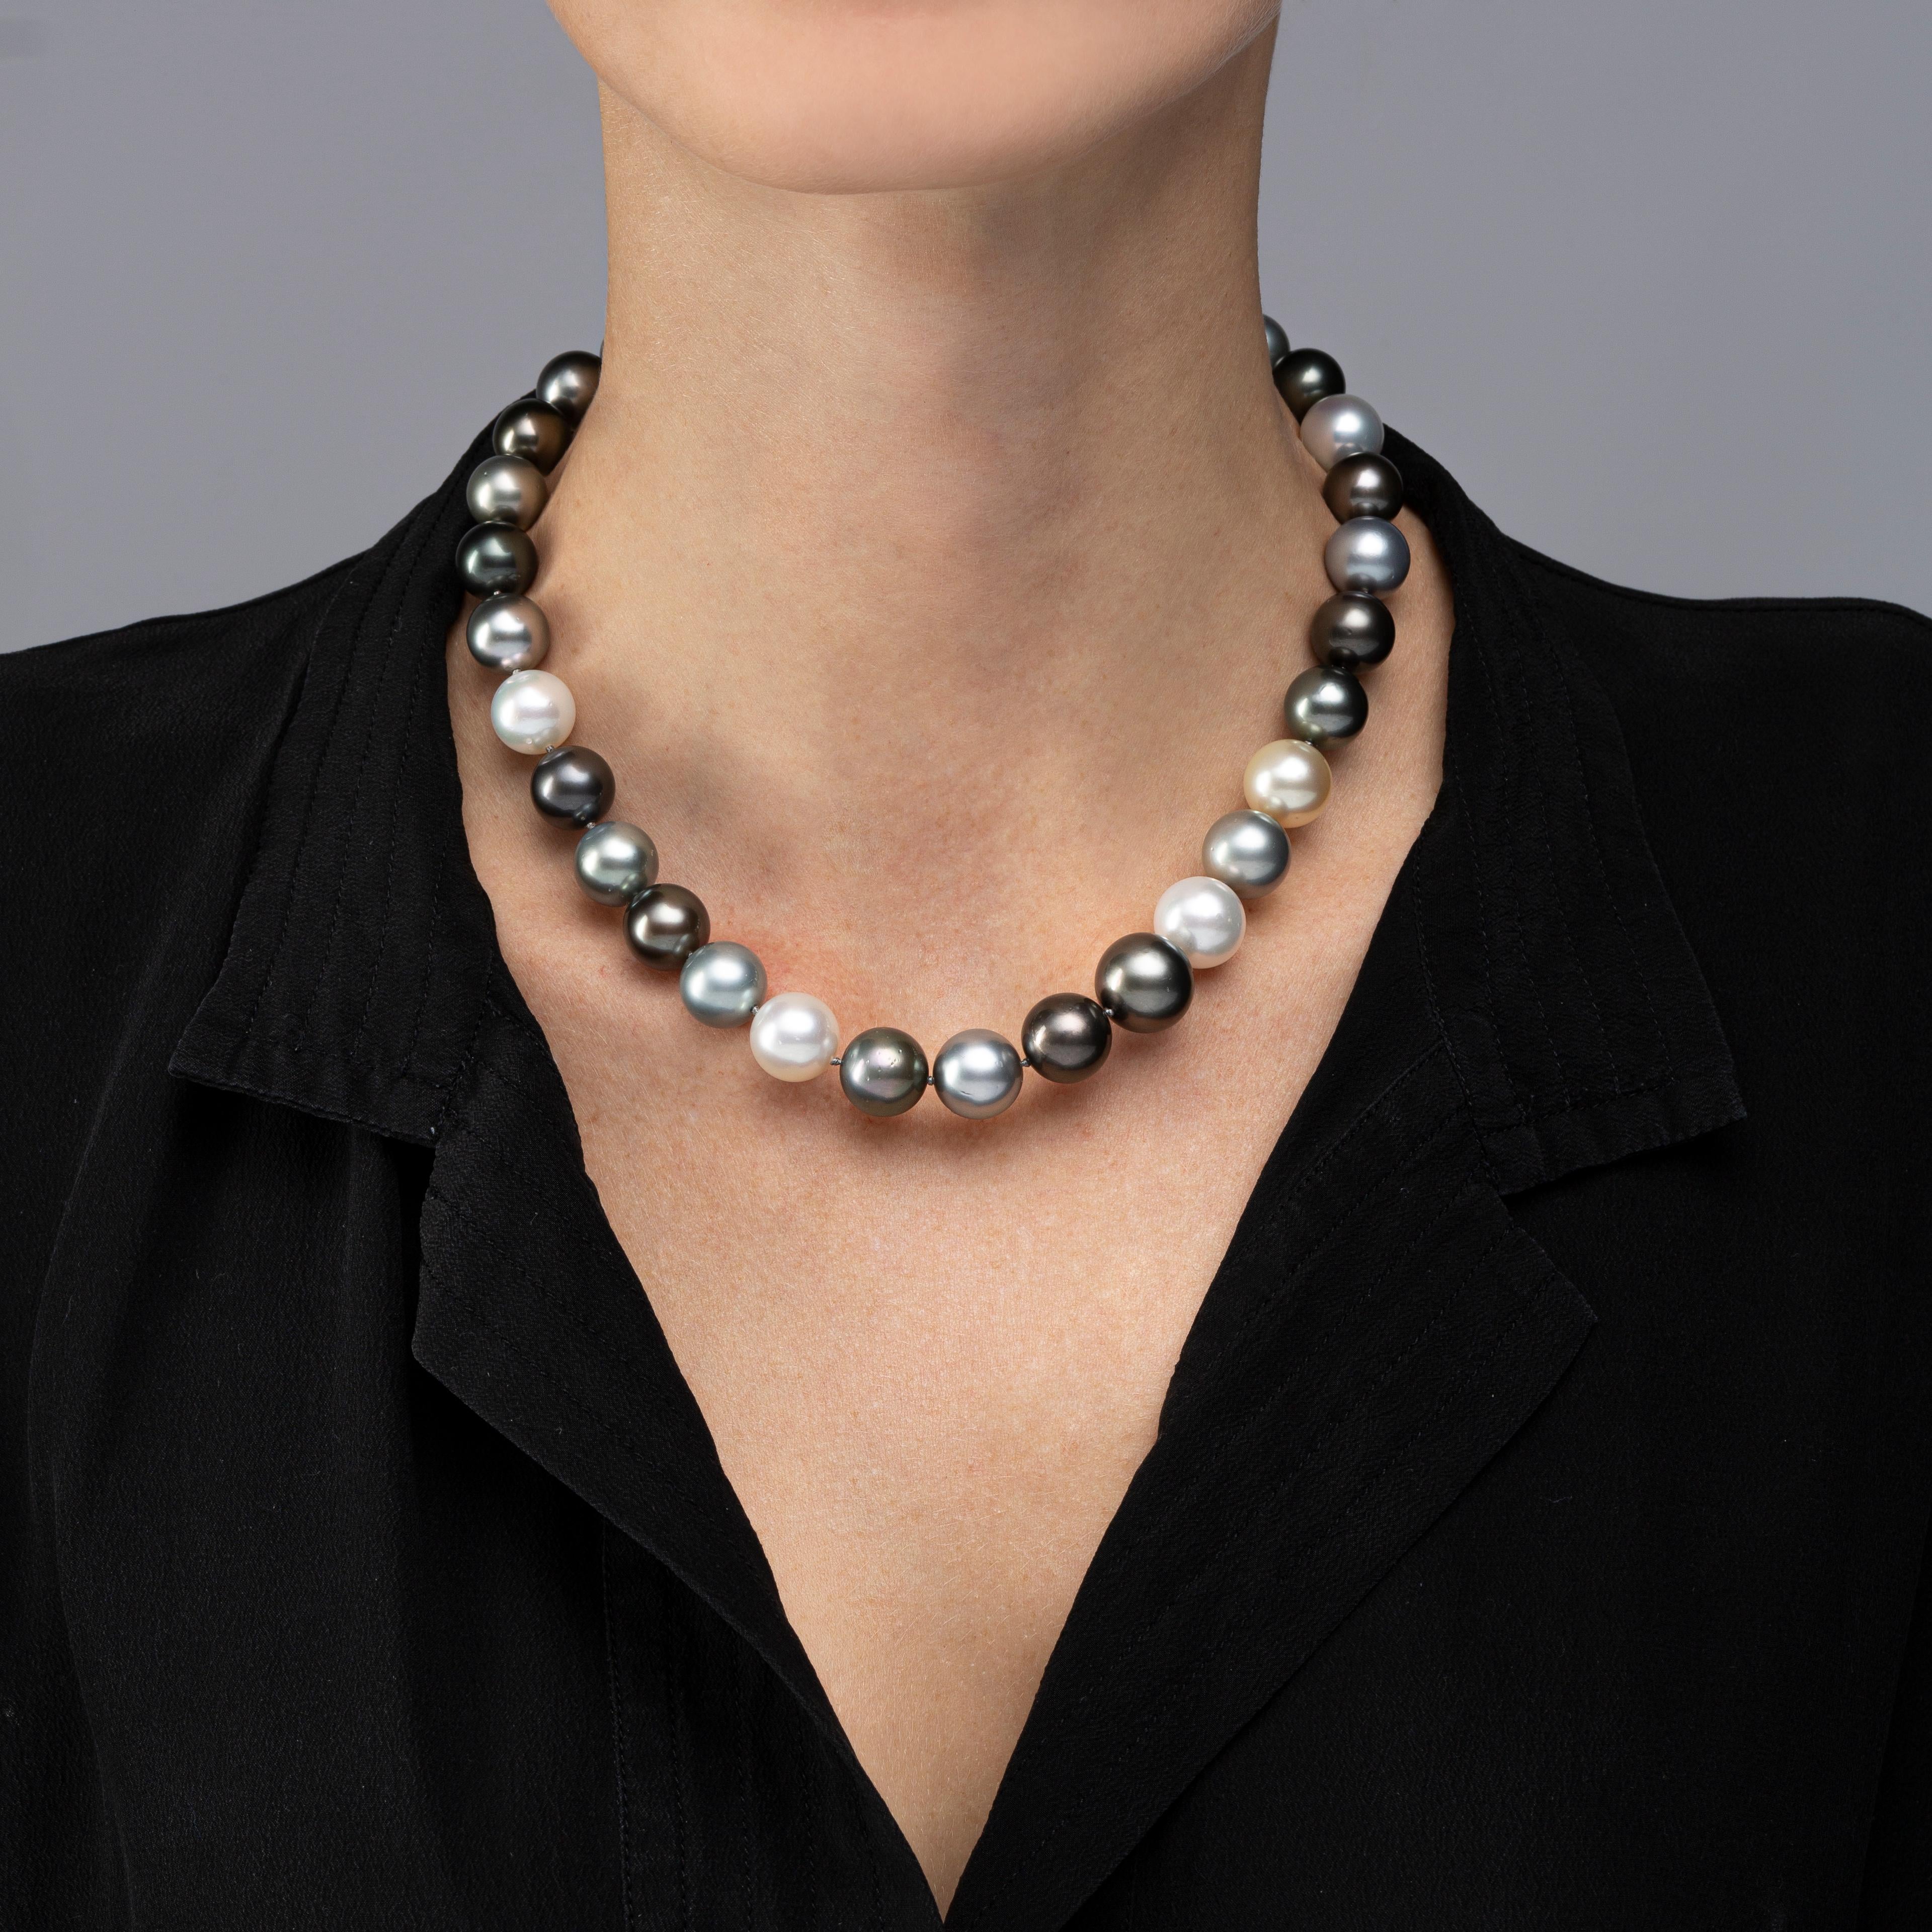 Alex Jona collection, seventeen inch long necklace consisting of thirty three, 0.47 - 0.55 in. / 11.9-13.9 mm, white, light grey and black South Sea pearls, the pearls are strung with an invisible clasps . Pearl Quality: AA,
Pearl Luster: AA . The